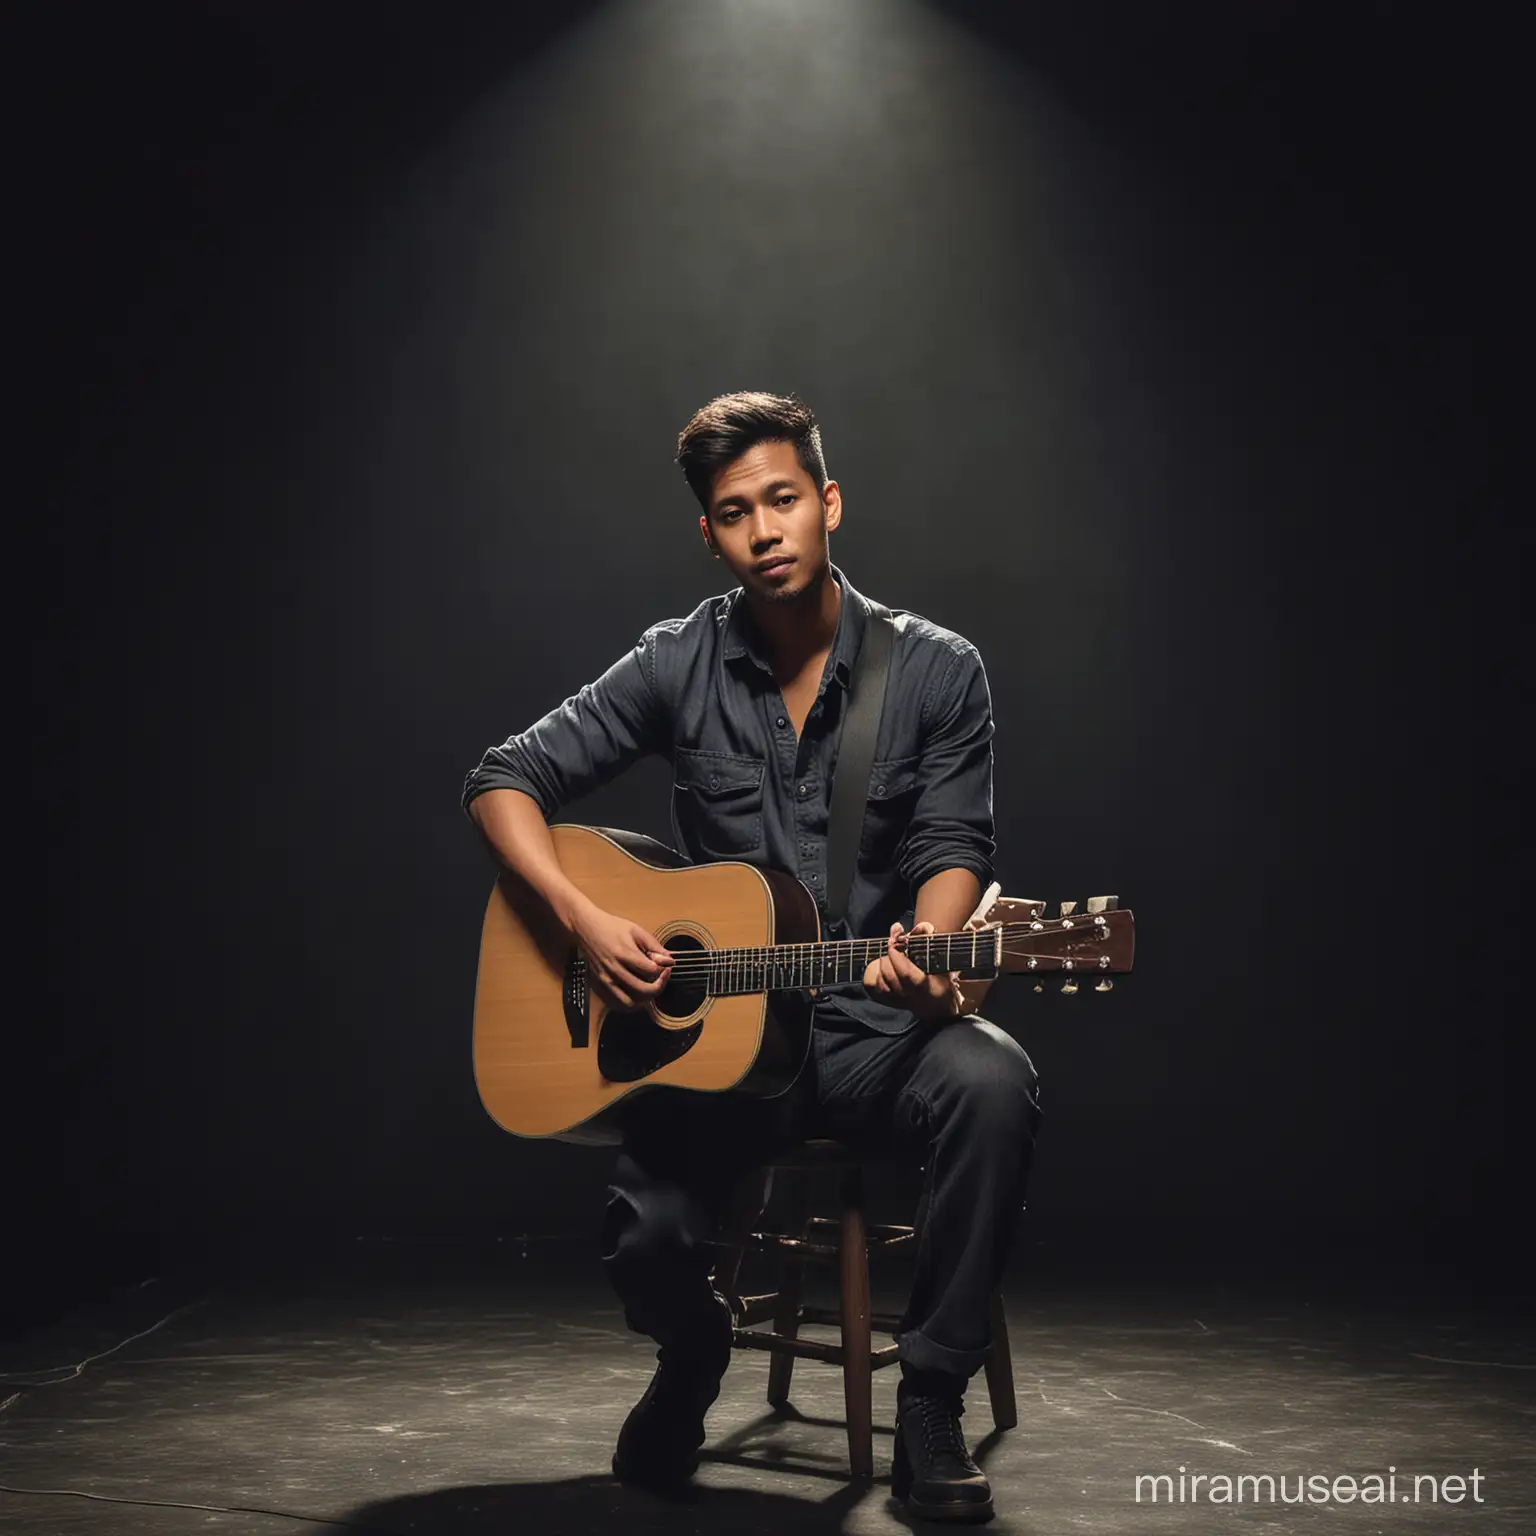 photograph indonesian of a 32 year old male singer songwriter sitting on a stool on a dark stage with an acoustic guitar wearing baggy pants